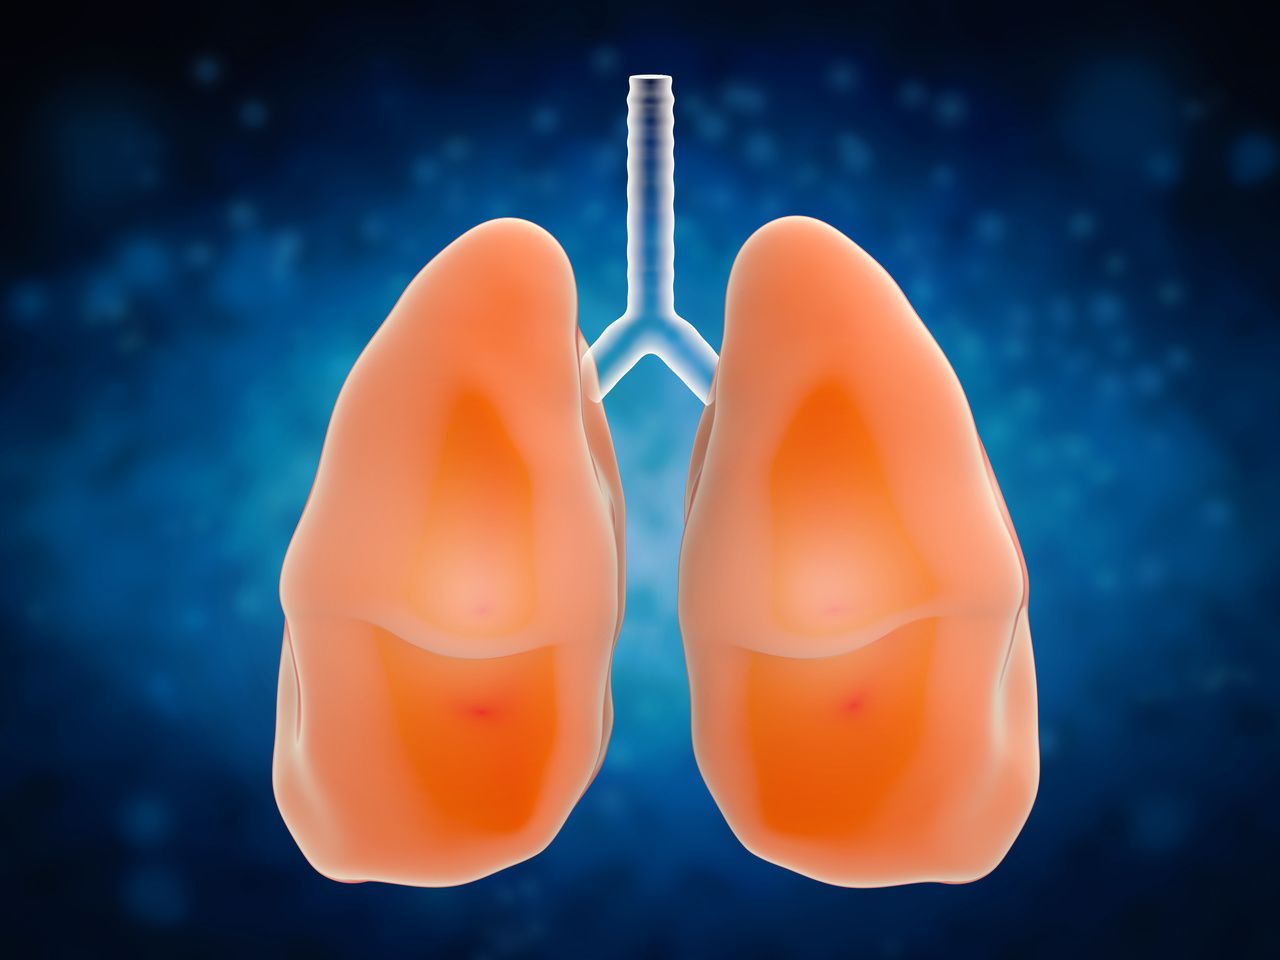 Lung Volume Reduction Coil Treatment Enables Recovery in Severe COPD Cases